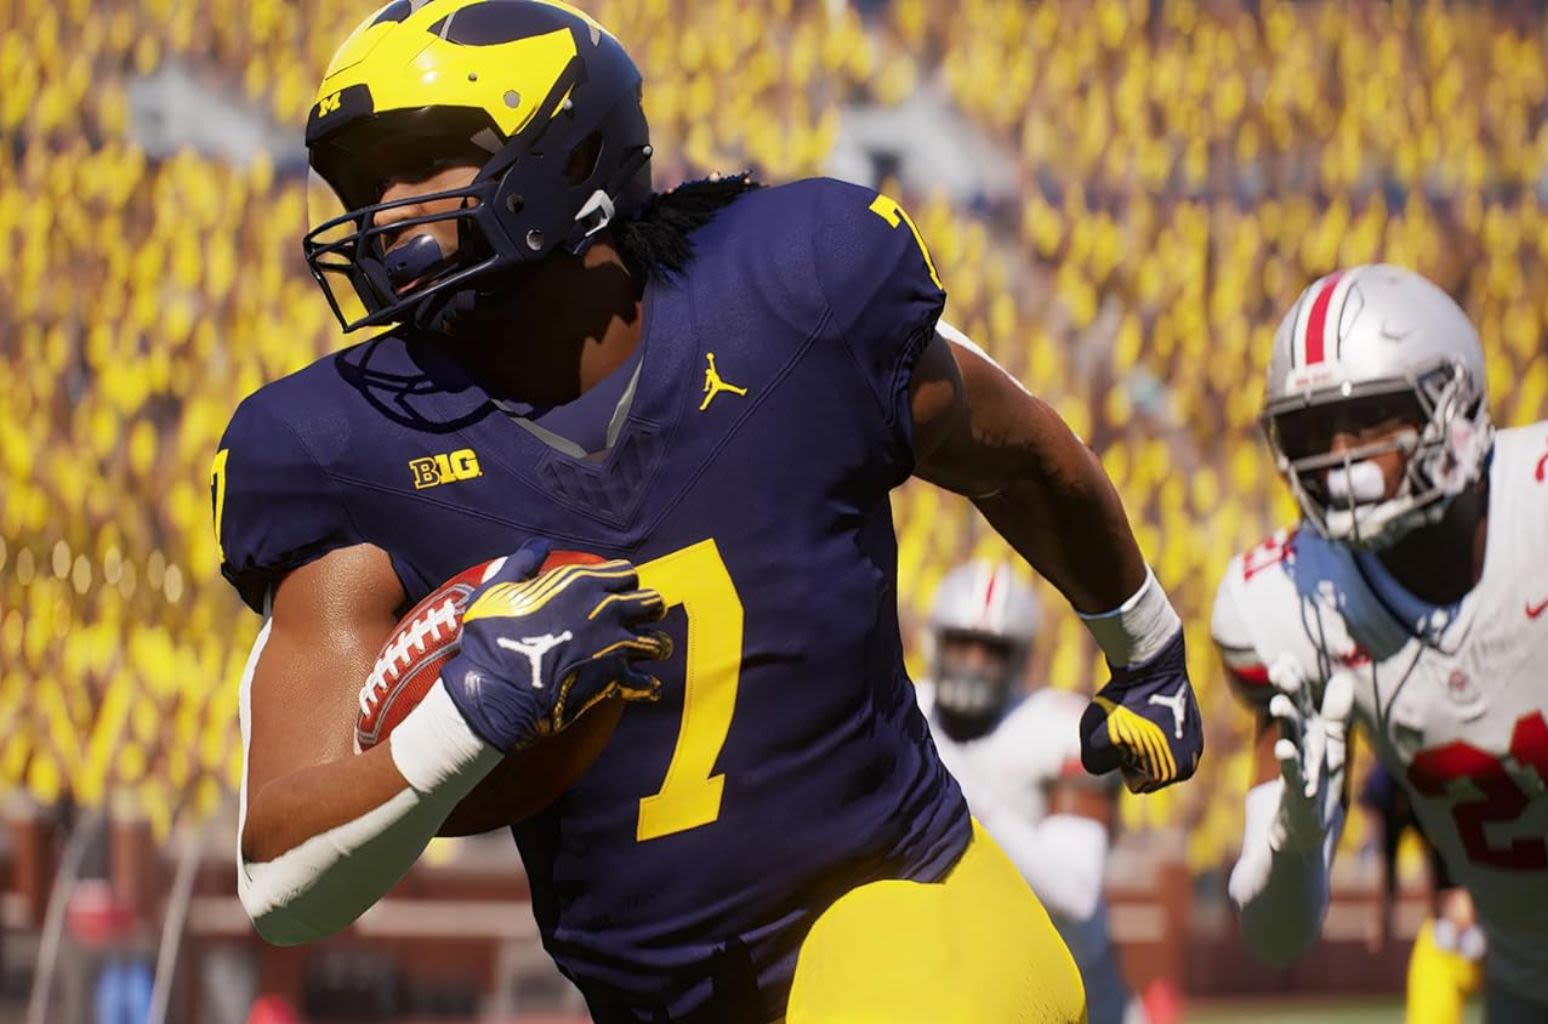 ‘EA Sports College Football 25’ Has Finally Arrived: Here’s Where to Score the Game Online